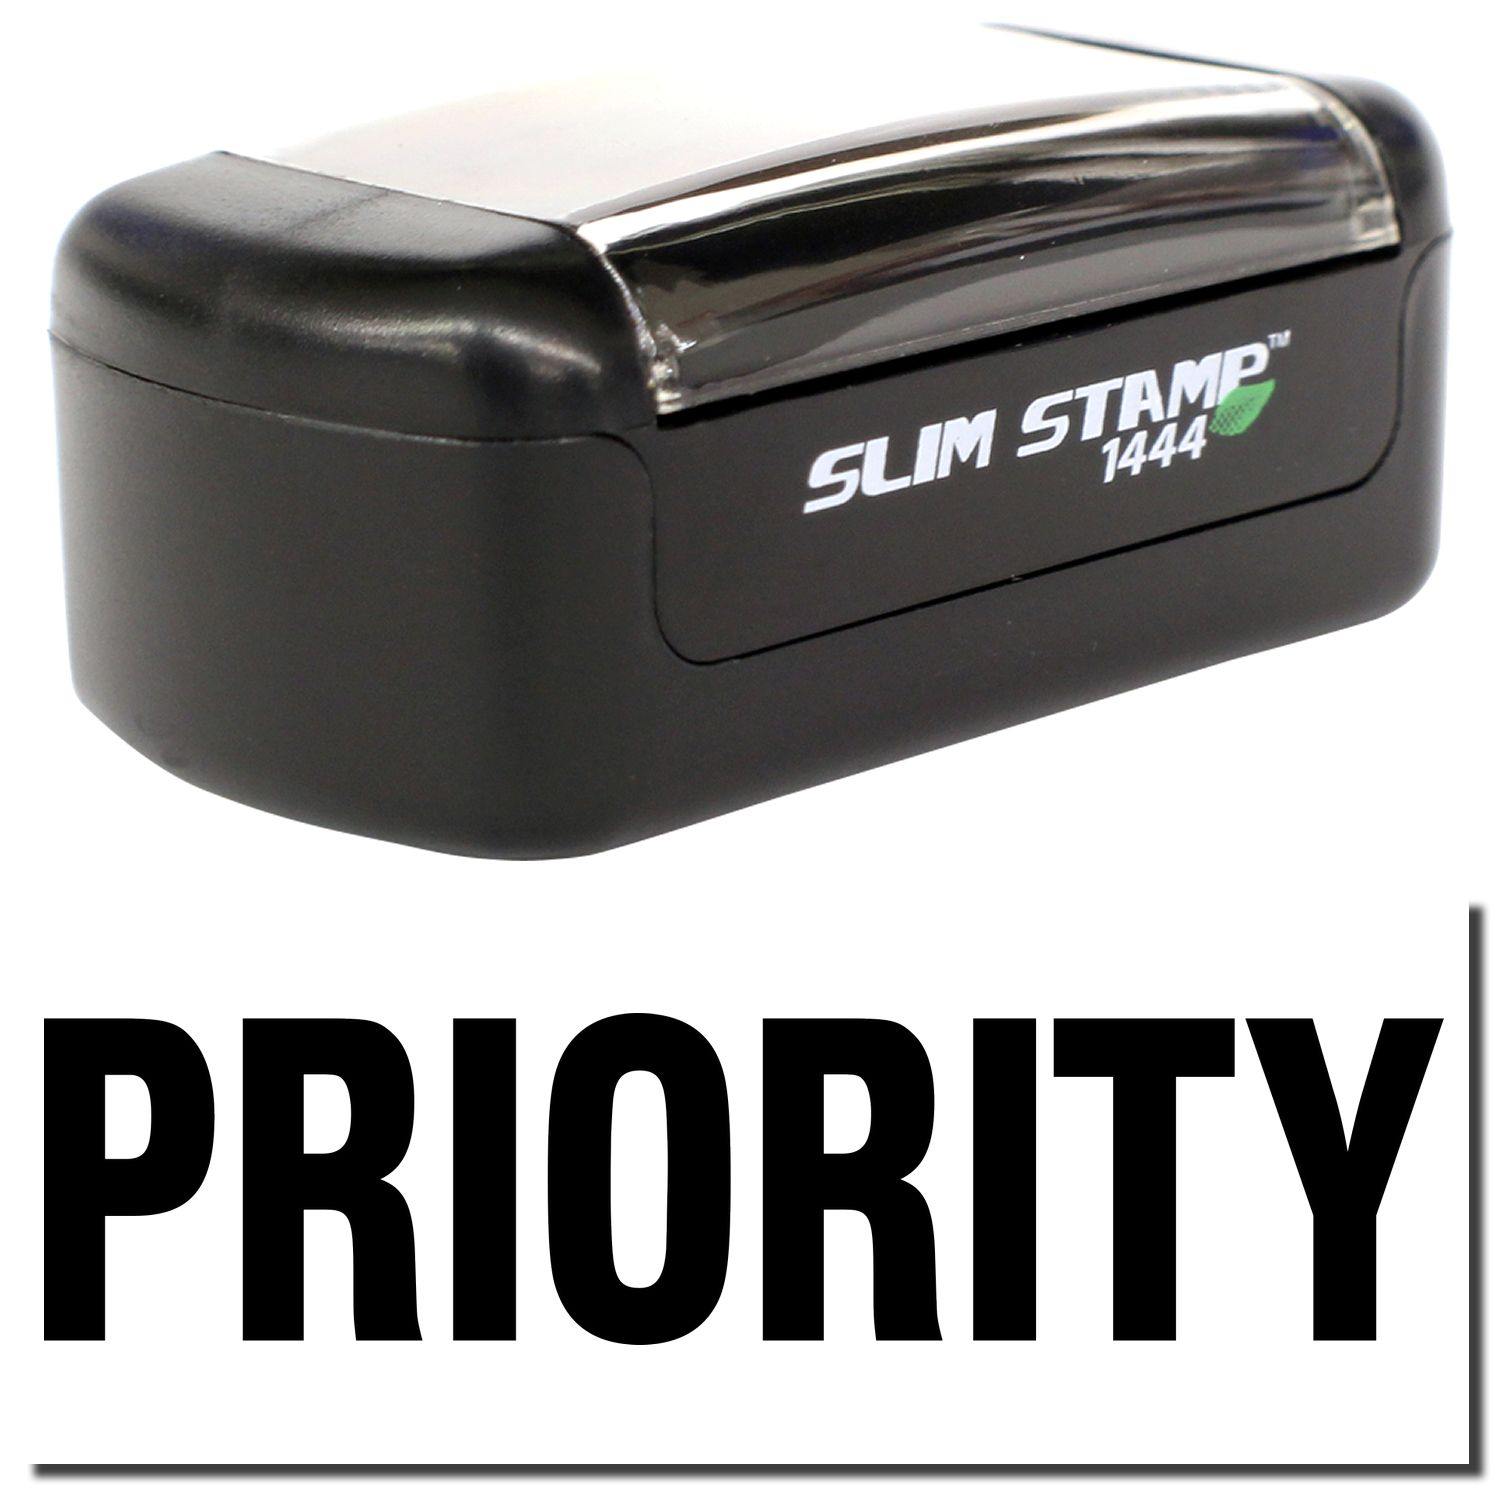 A stock office pre-inked stamp with a stamped image showing how the text "PRIORITY" in bold font is displayed after stamping.